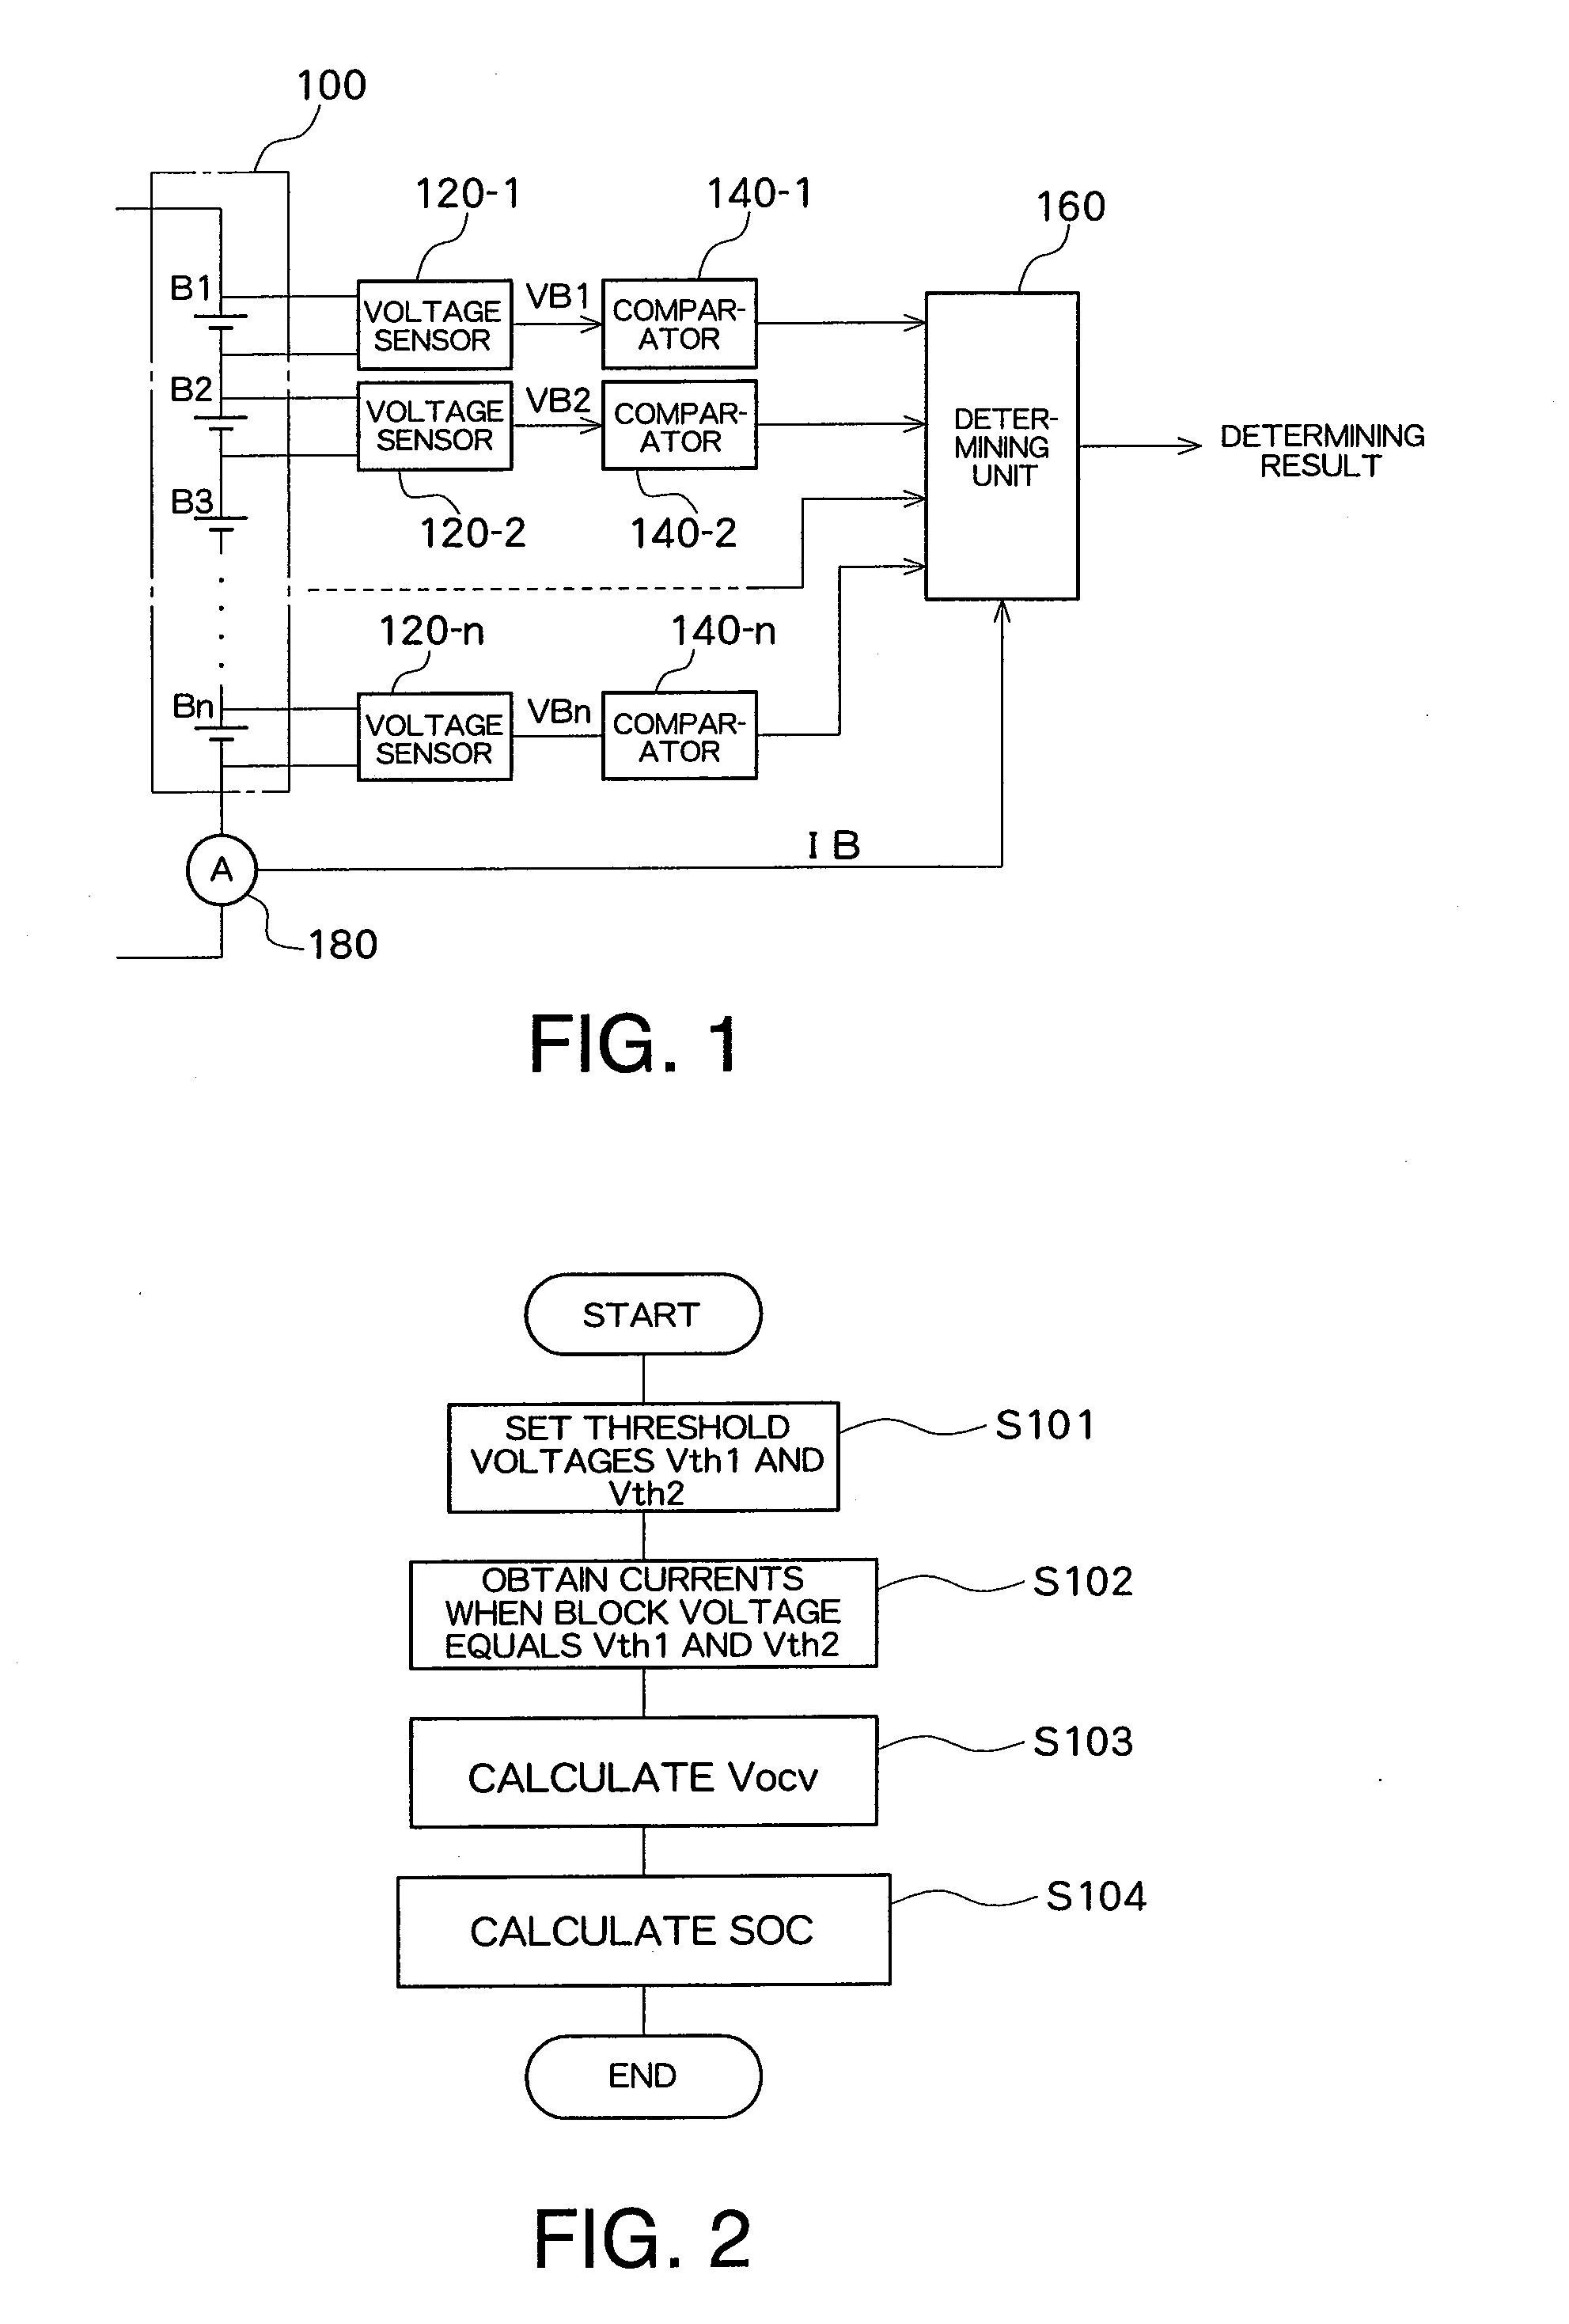 Apparatus and method for detecting charged state of electric storage device